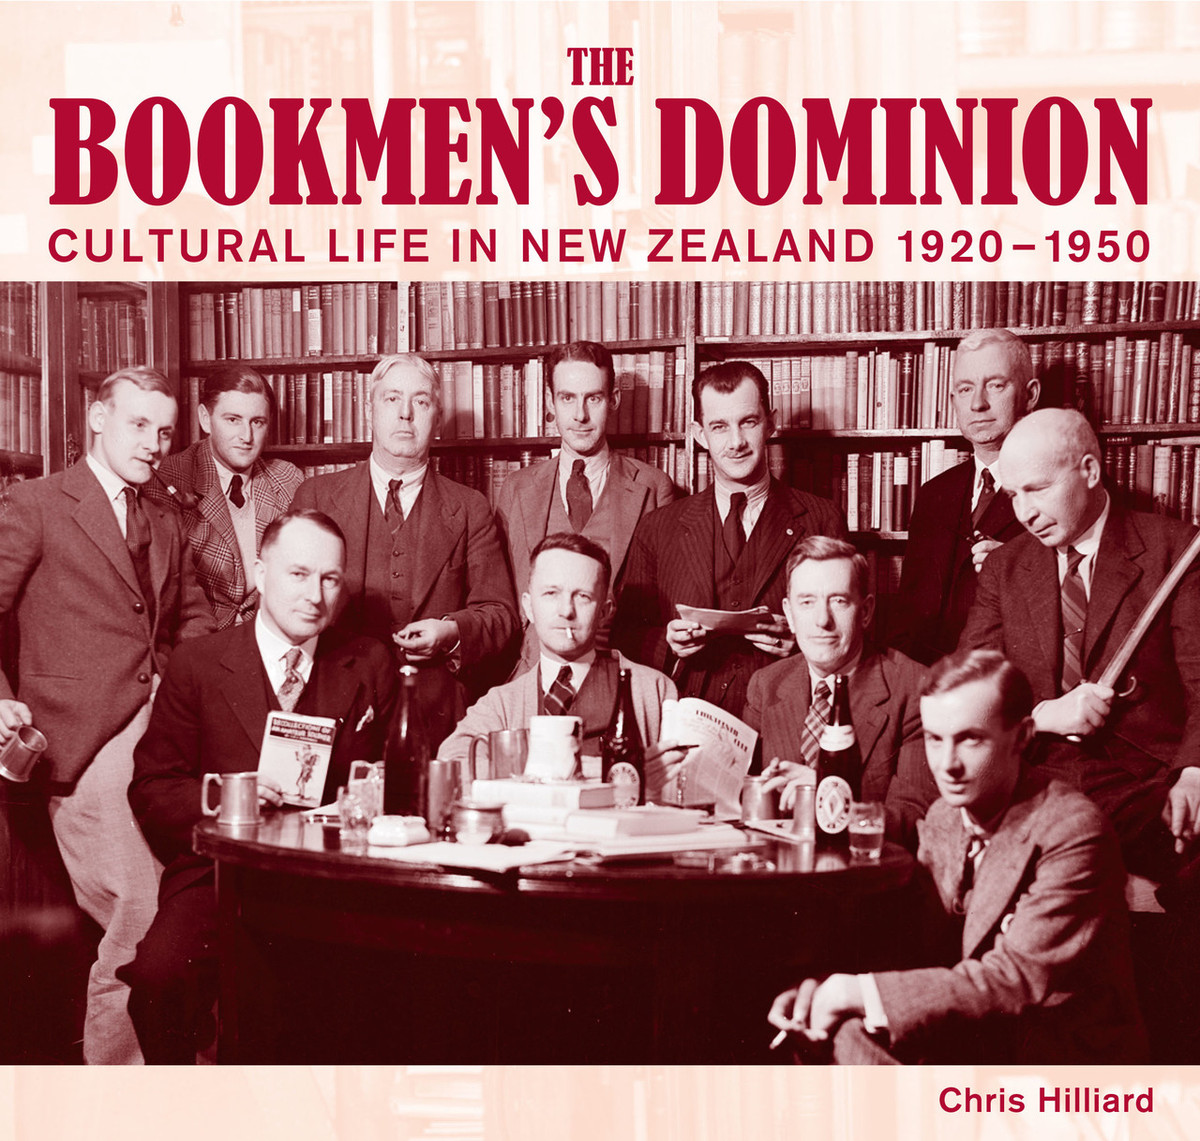 The Bookmen’s Dominion: Cultural Life in New Zealand 1920–1950 by Chris Hilliard